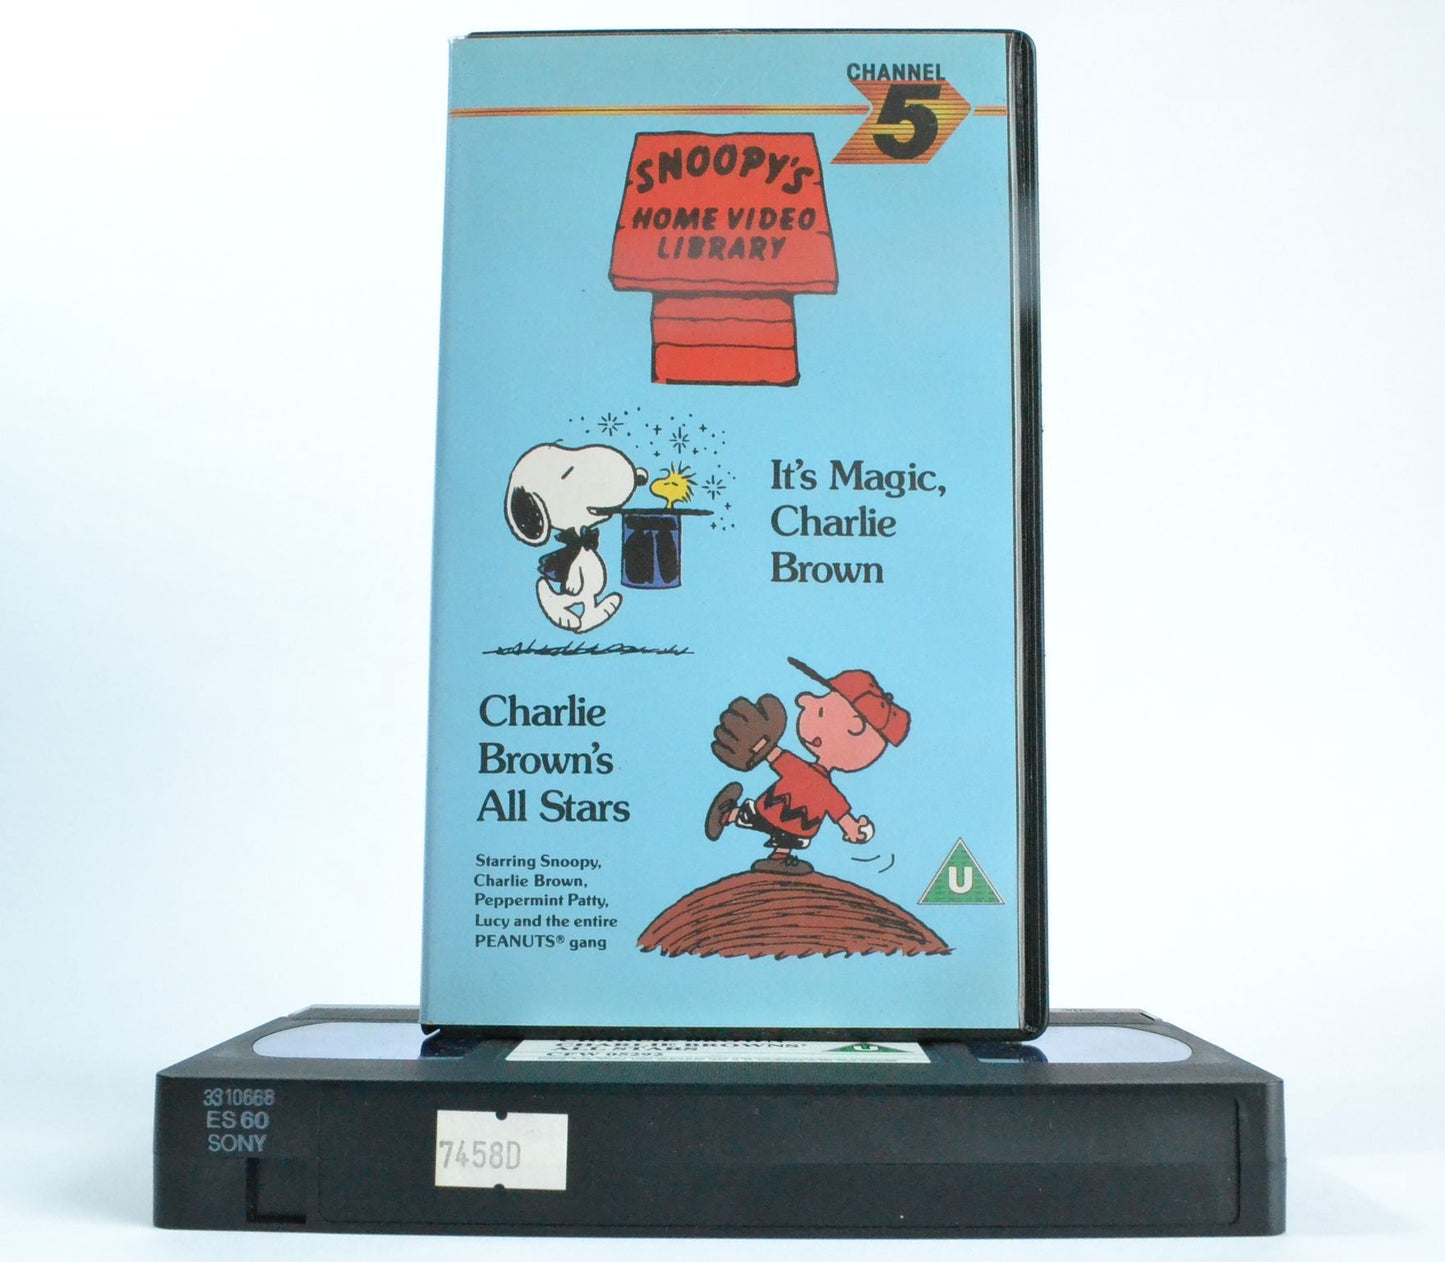 Snoopy: It’s Magic Charlie Brown - All Stars - (1986) Chan 5 - Kids - VHS-